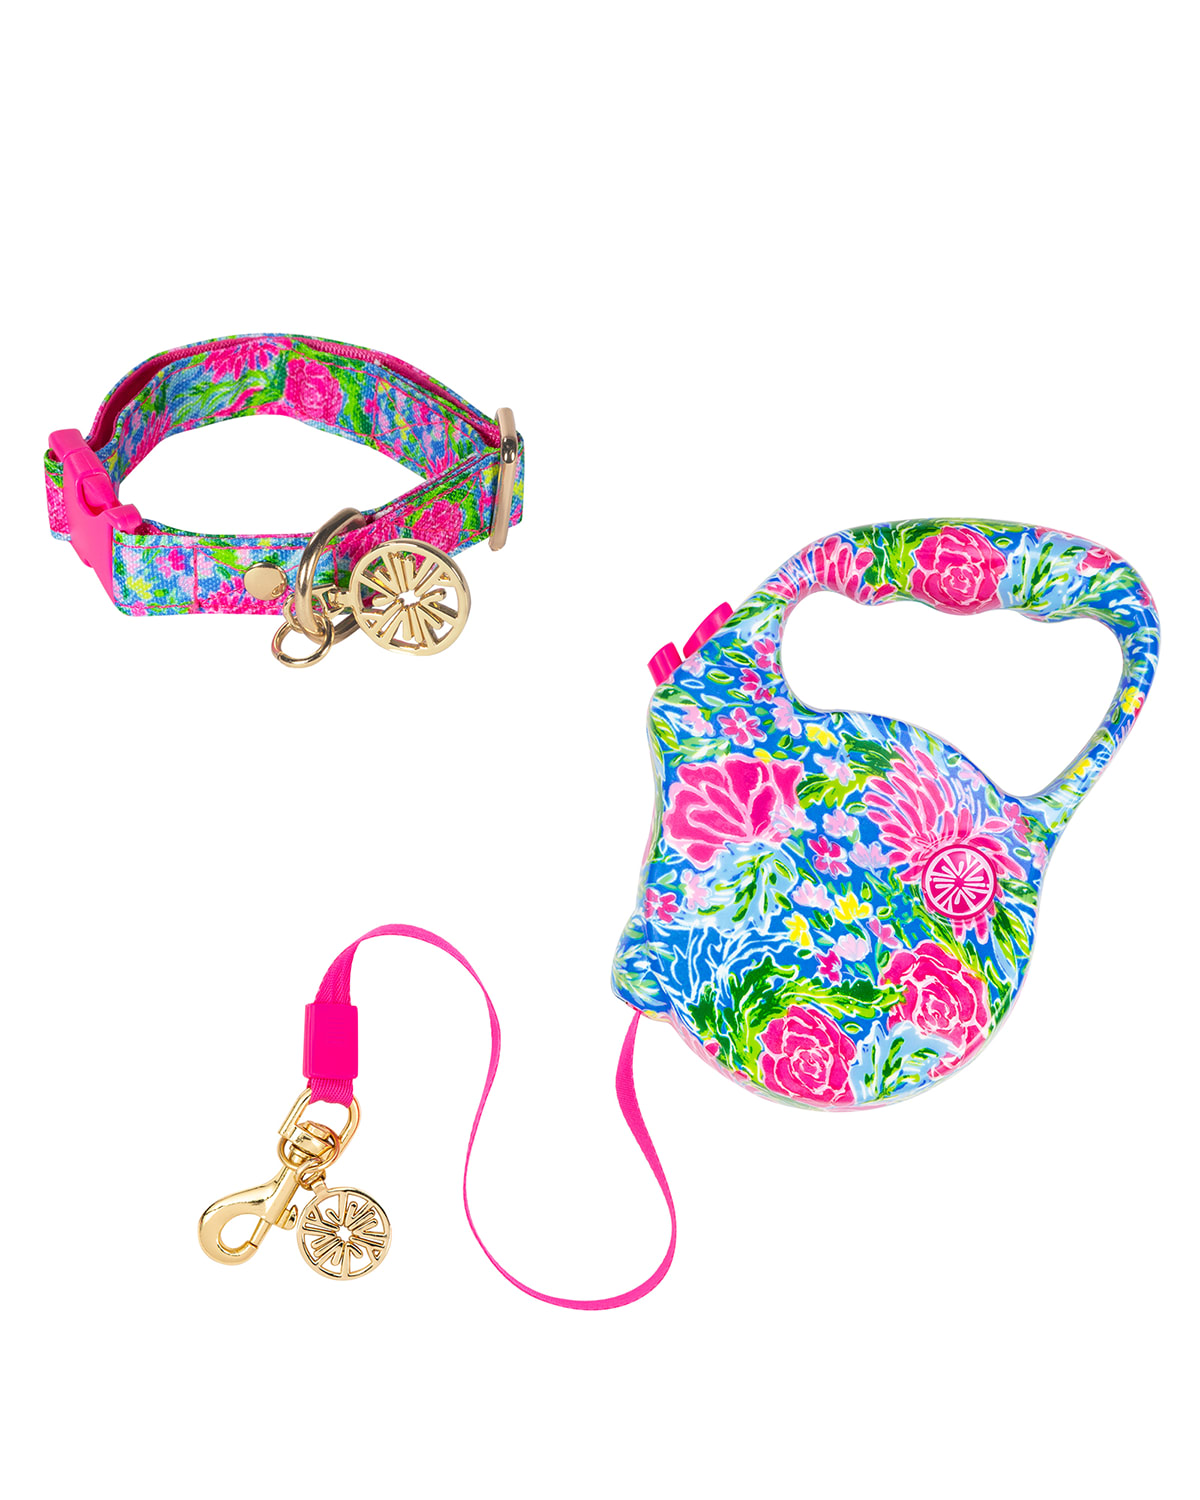 Lilly Pulitzer Bunny Business Dog Lead Leash & Collar, S/M